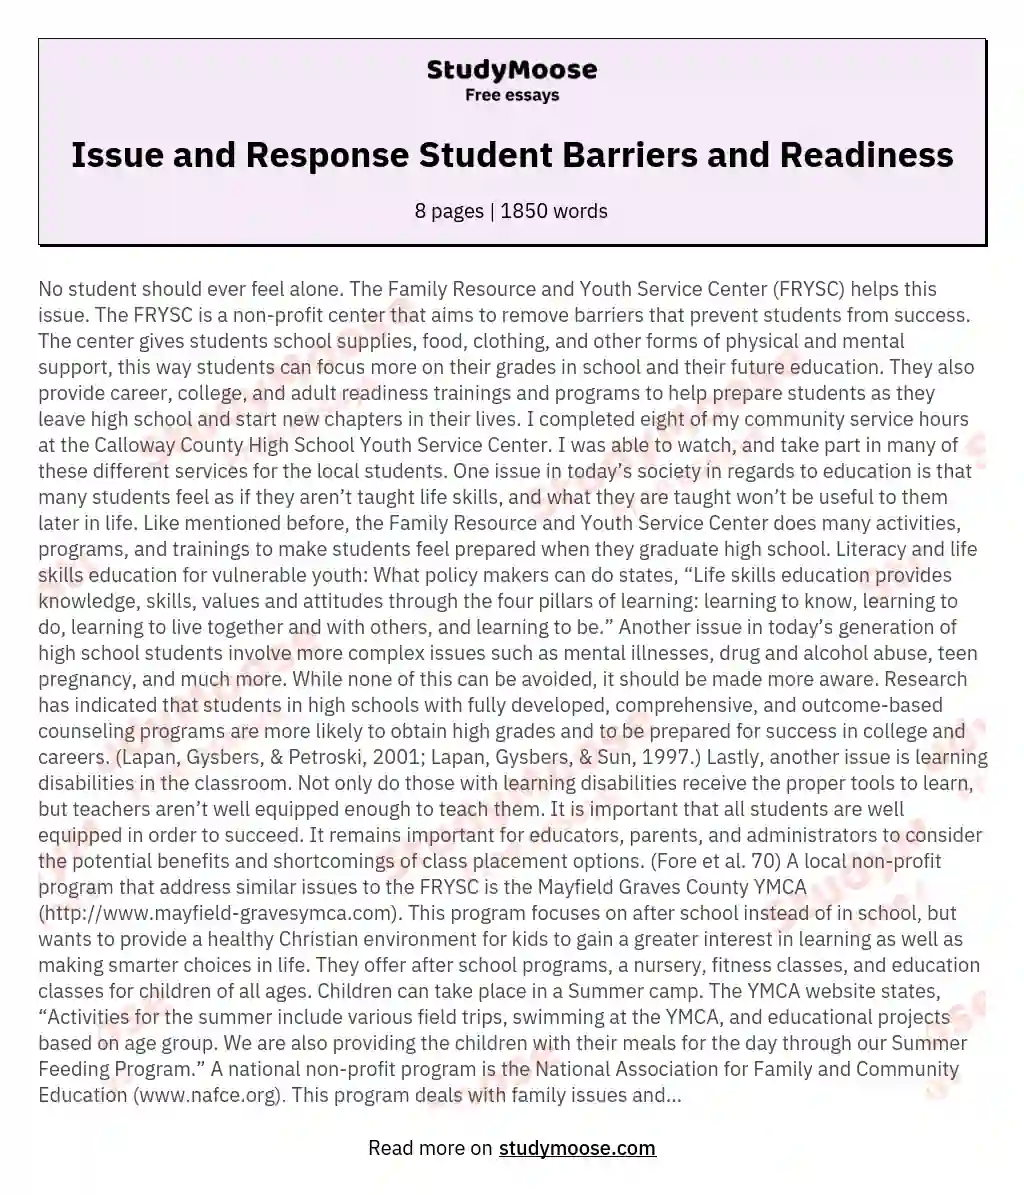 Issue and Response Student Barriers and Readiness essay